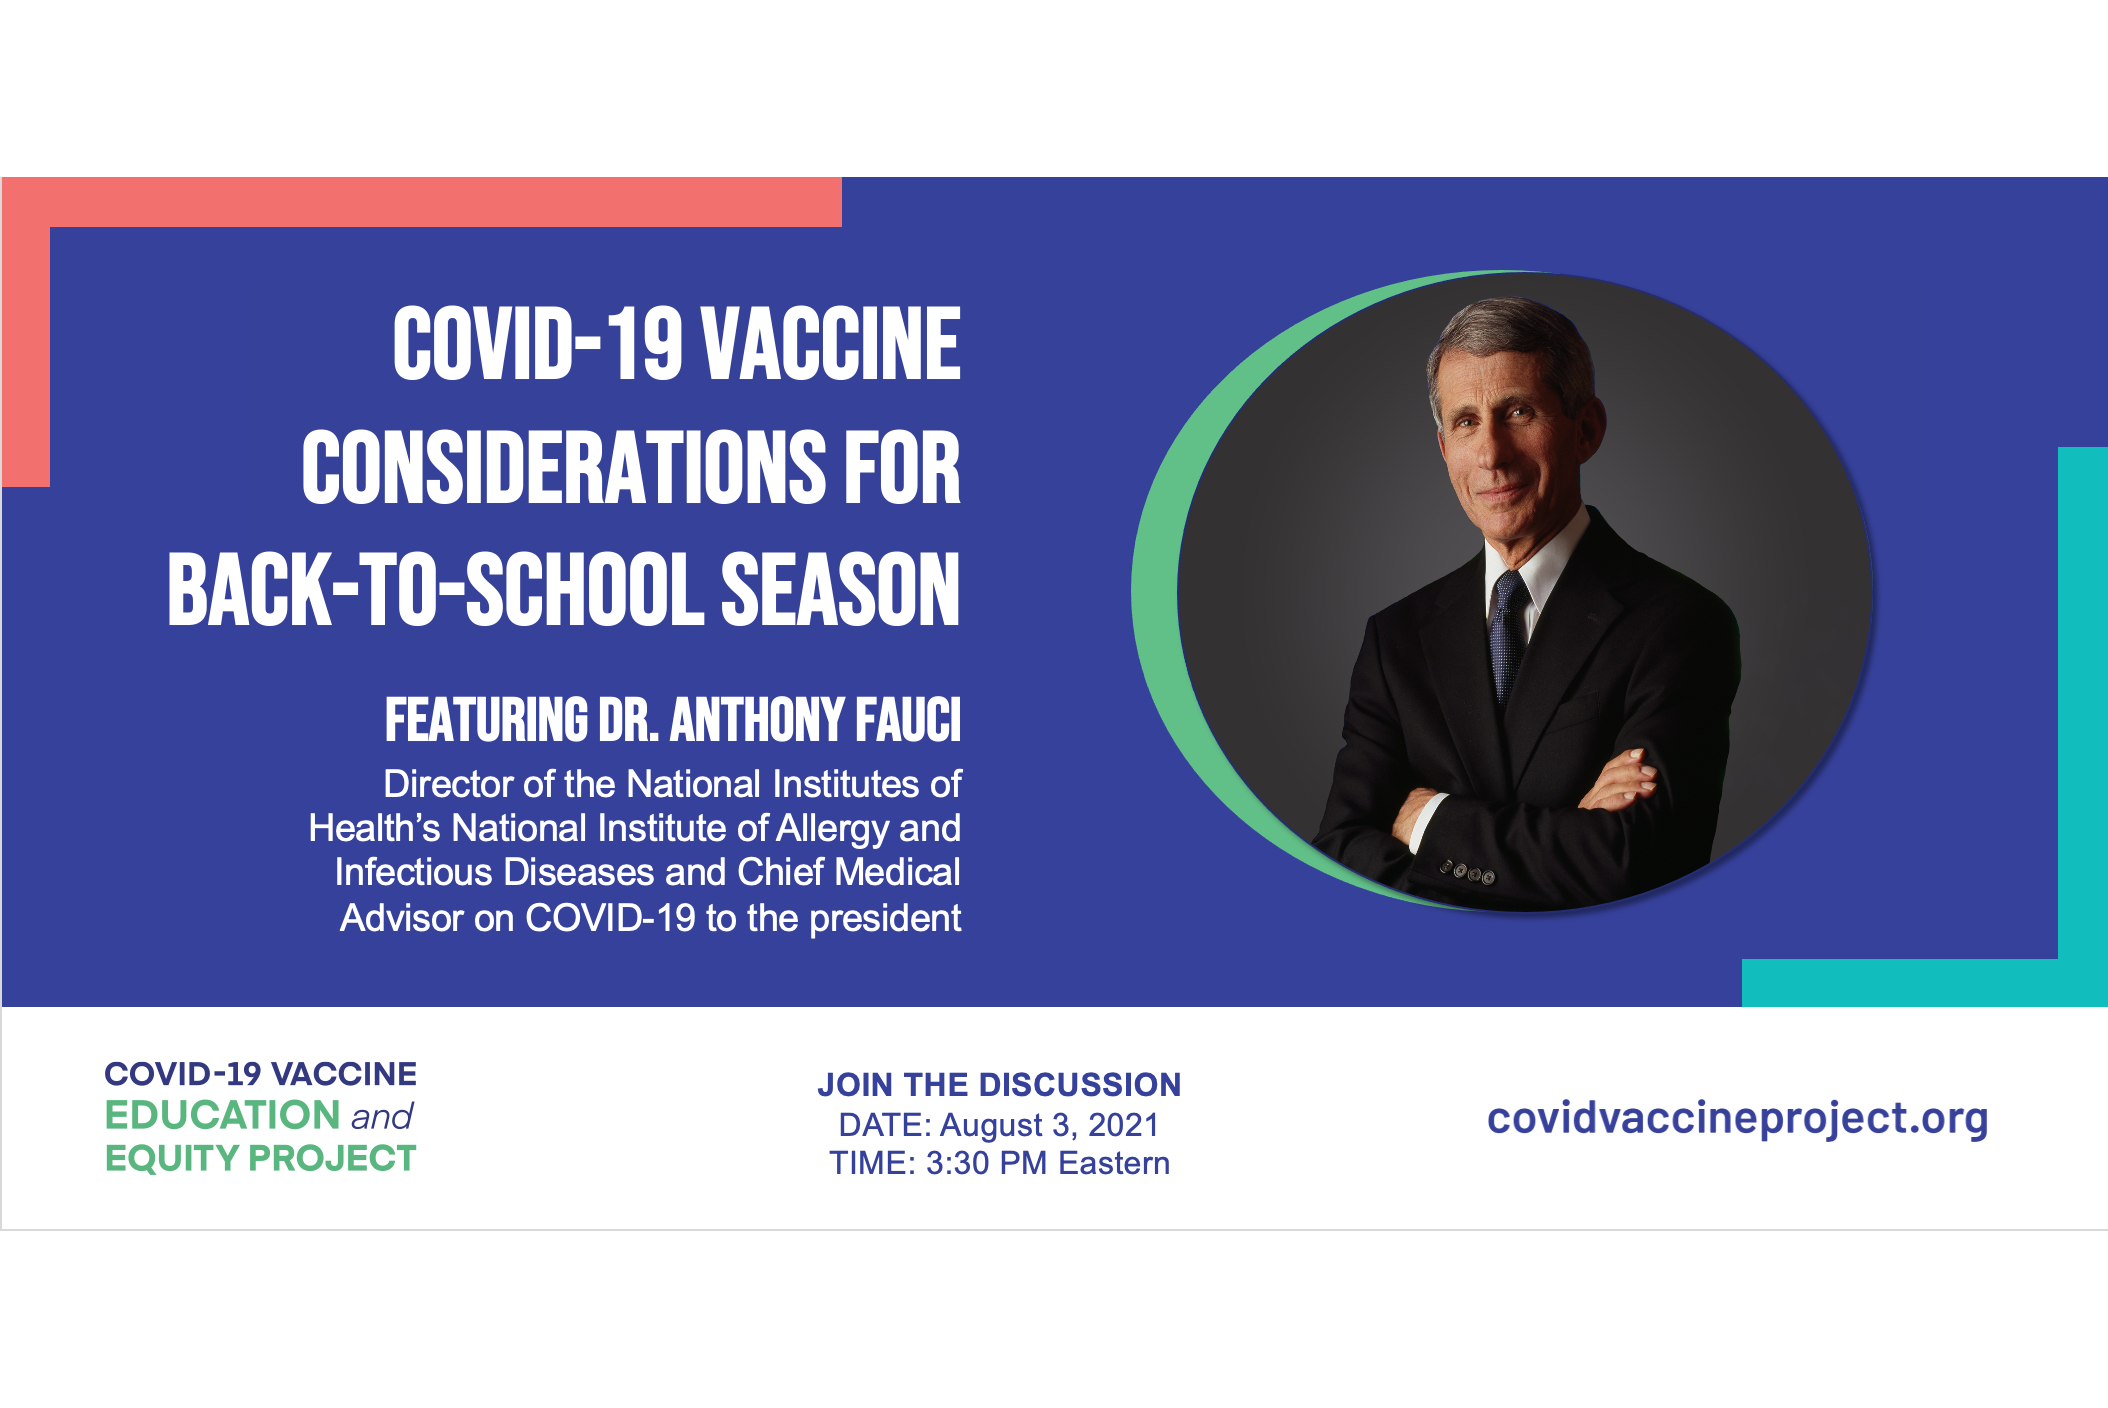 COVID-19 Vaccine Considerations for Back-to-School Season